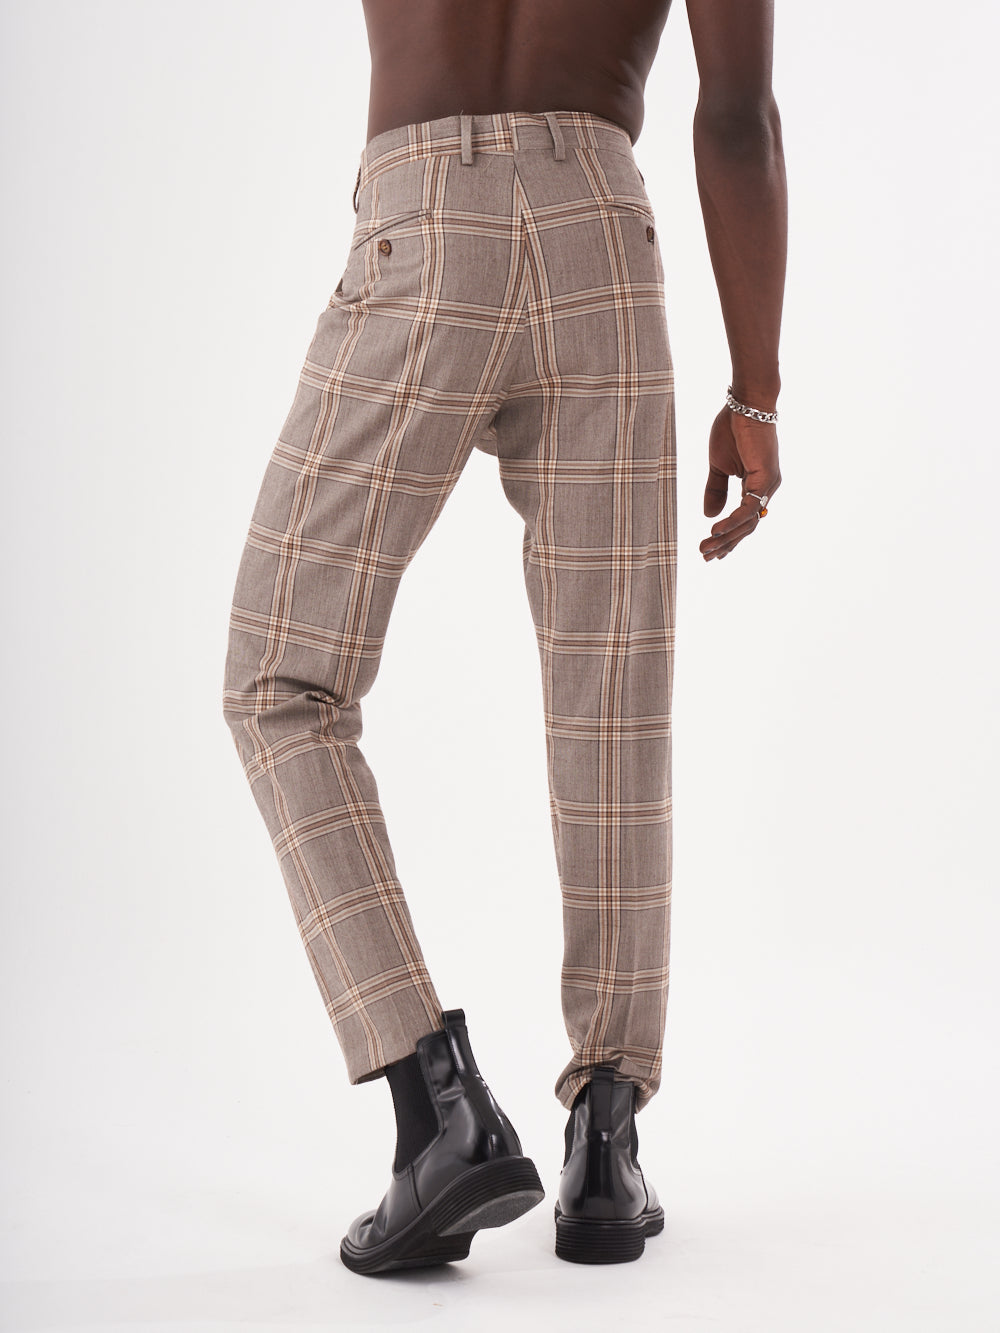 The back of a man wearing brown checkered ROOK PANTS.